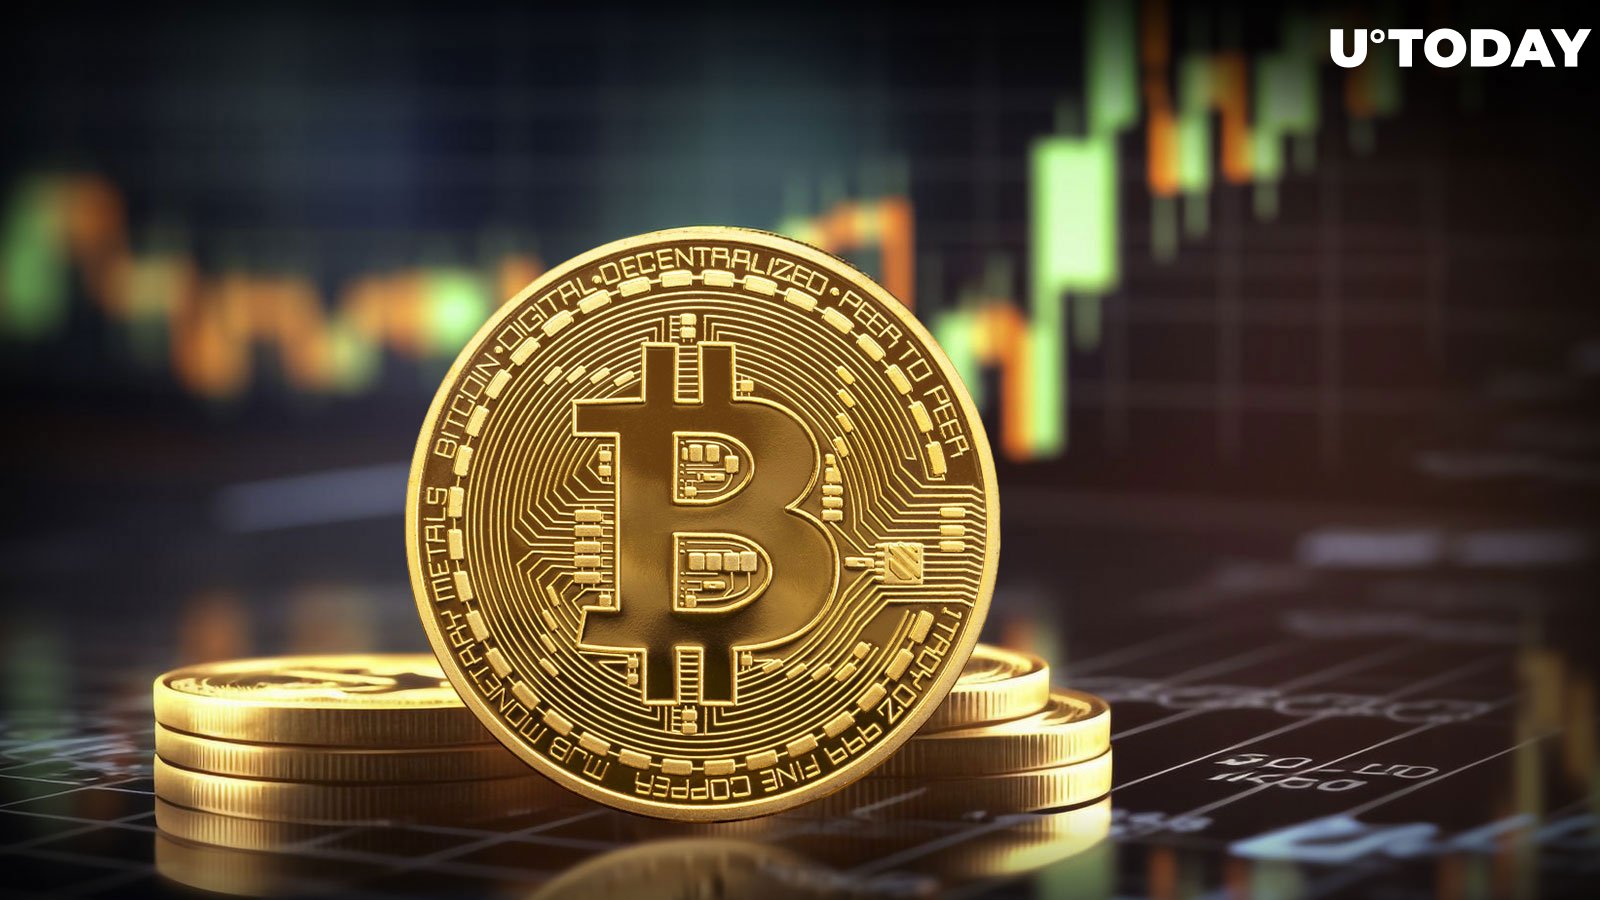 Key Reasons Why Bitcoin (BTC) Just Regained $64,000